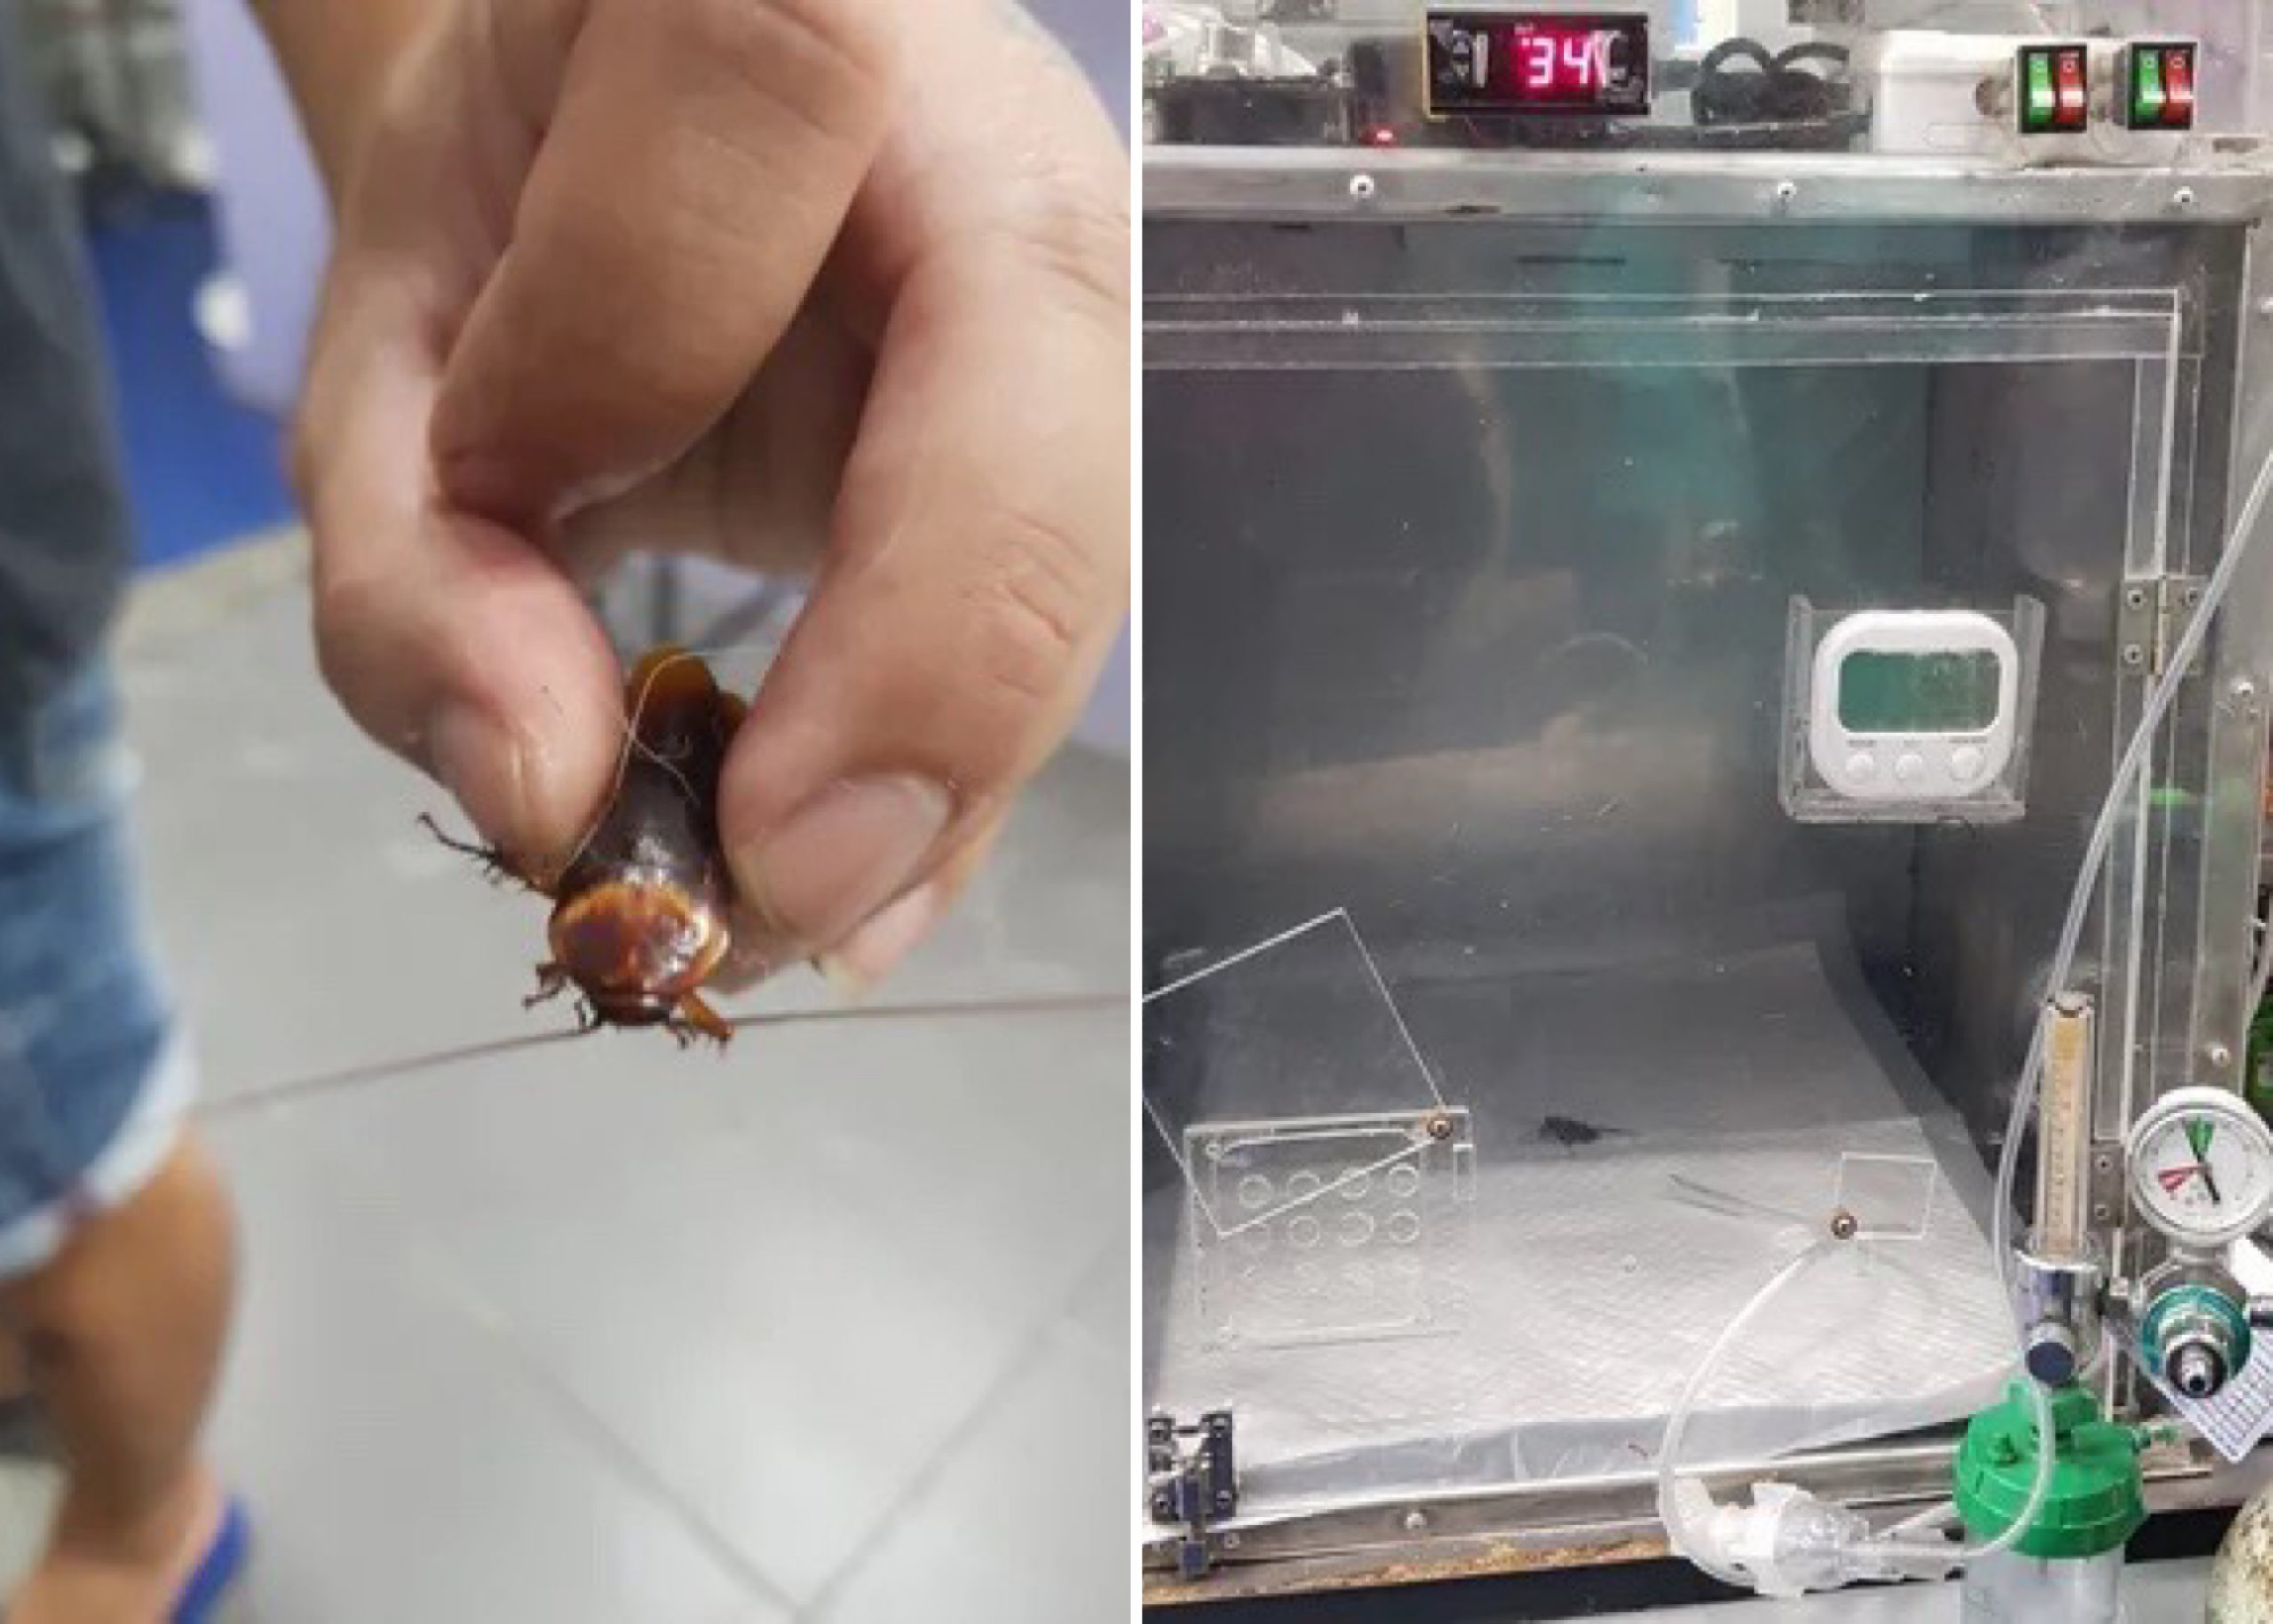 Man Takes Injured Cockroach To Vet Hospital For Emergency Treatment